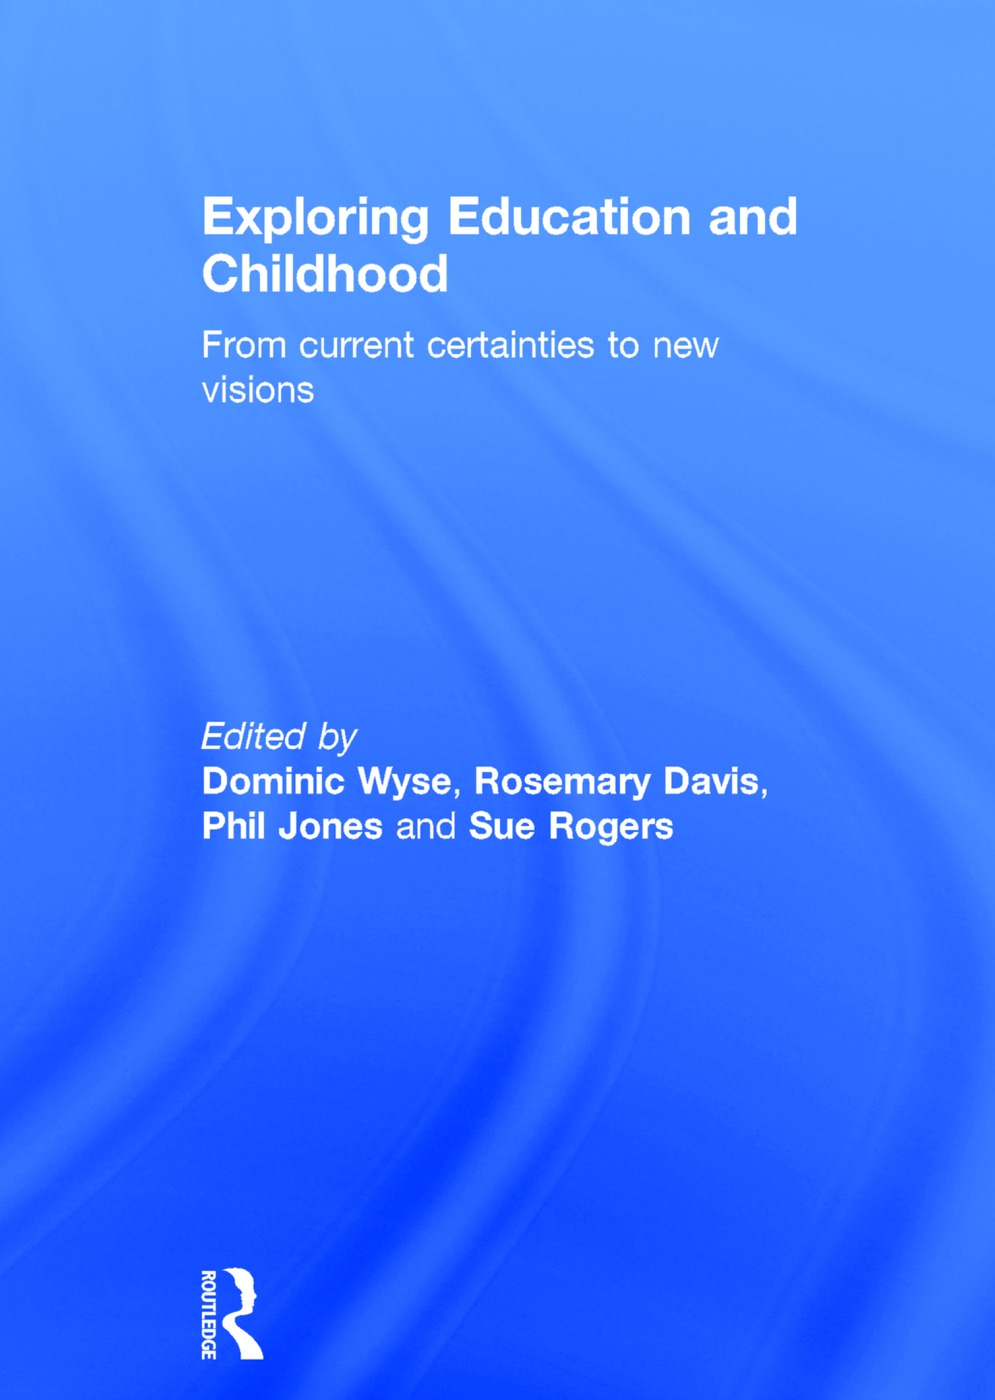 Exploring Education and Childhood: From Current Certainties to New Visions